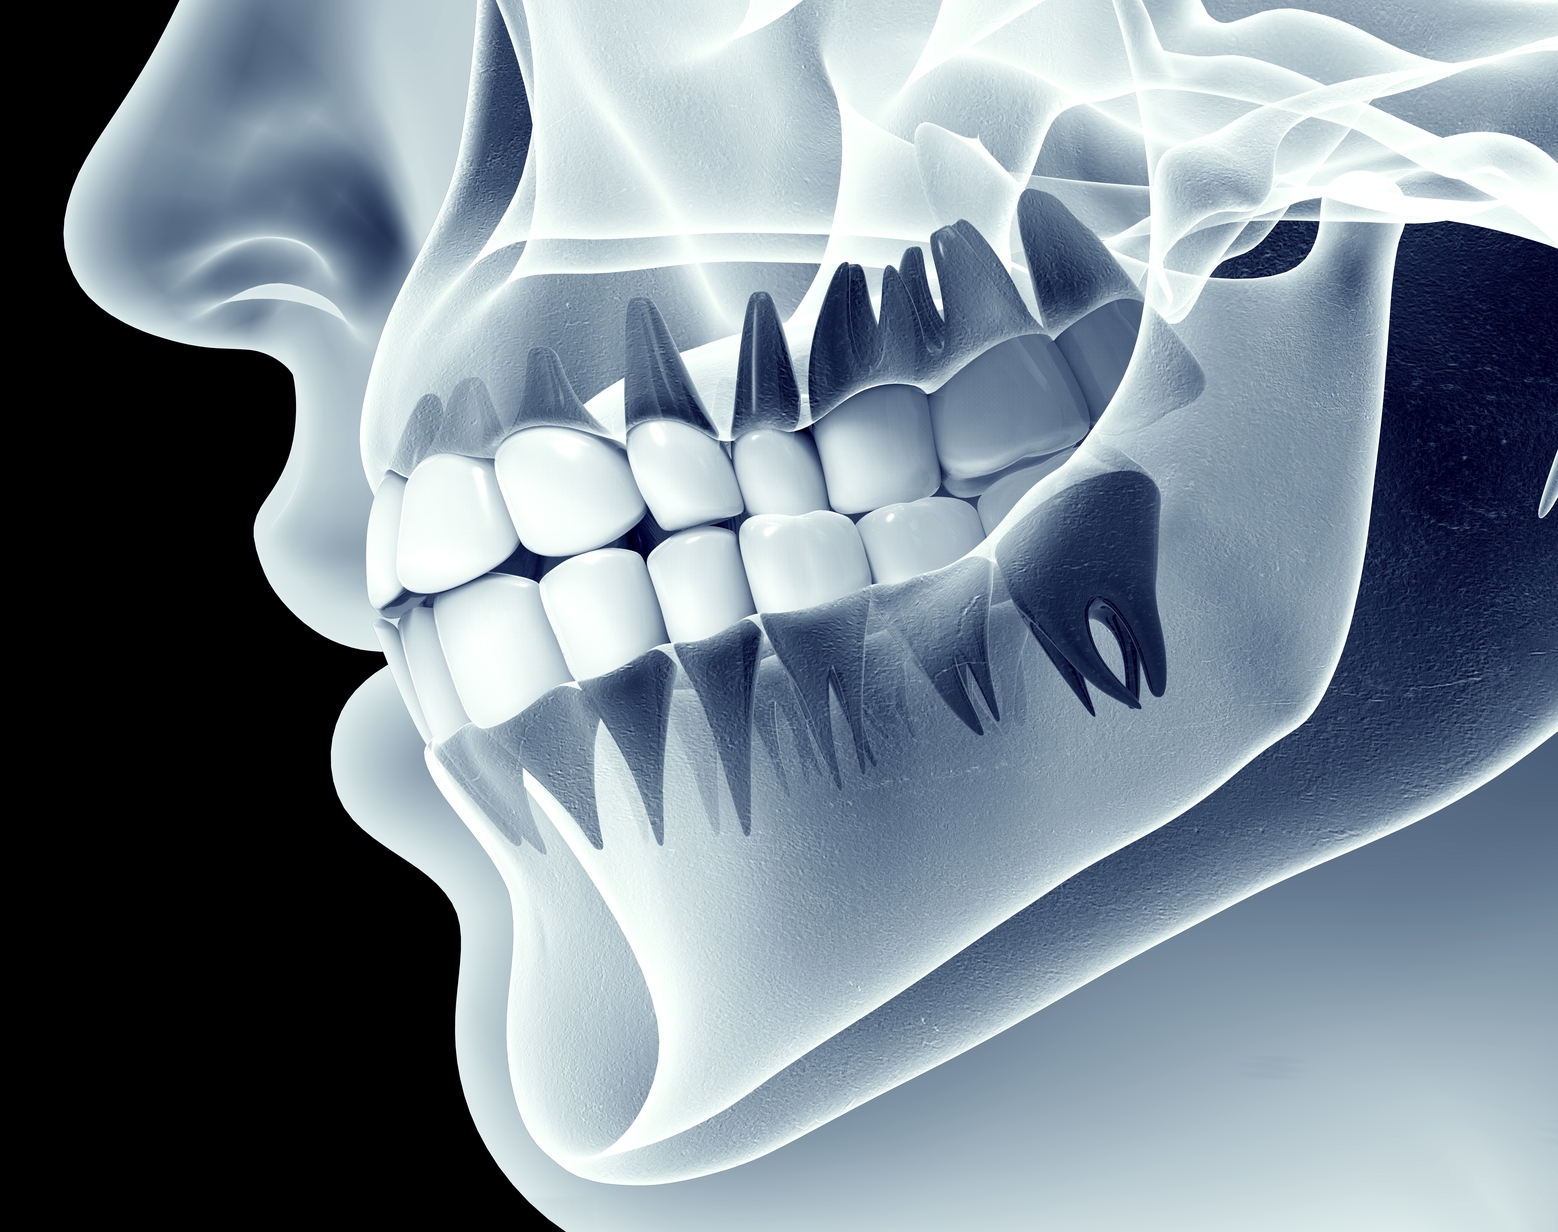 CBCT Scan - DrBK Cosmetic Dentist & Aesthetics Clinic in Reading